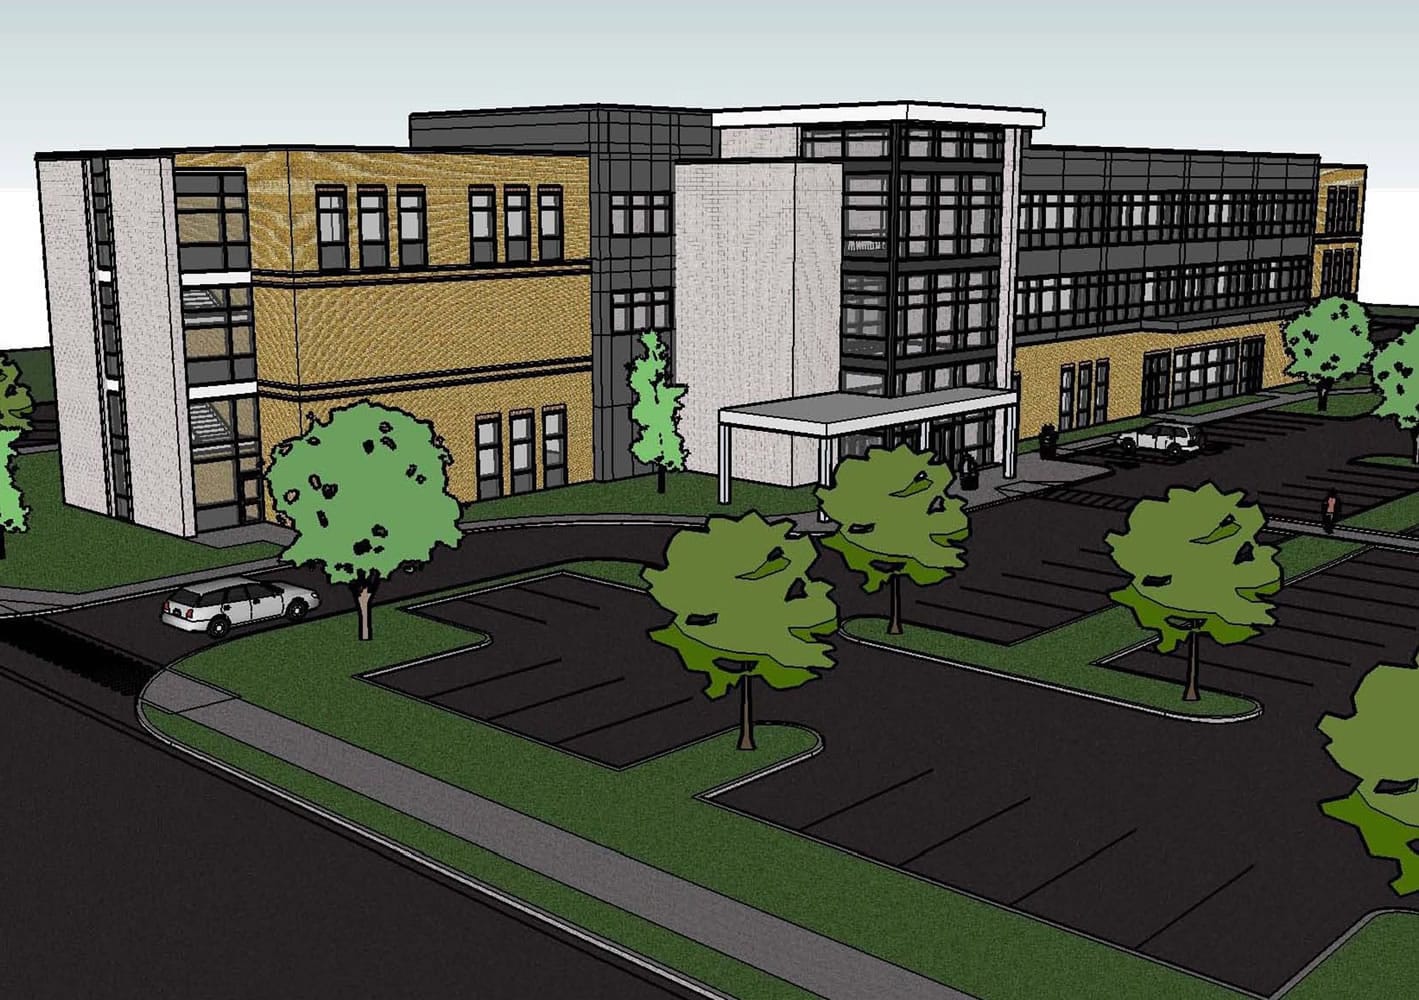 The new Health and BioScience Academy should open in fall 2013, with room for 500 students.